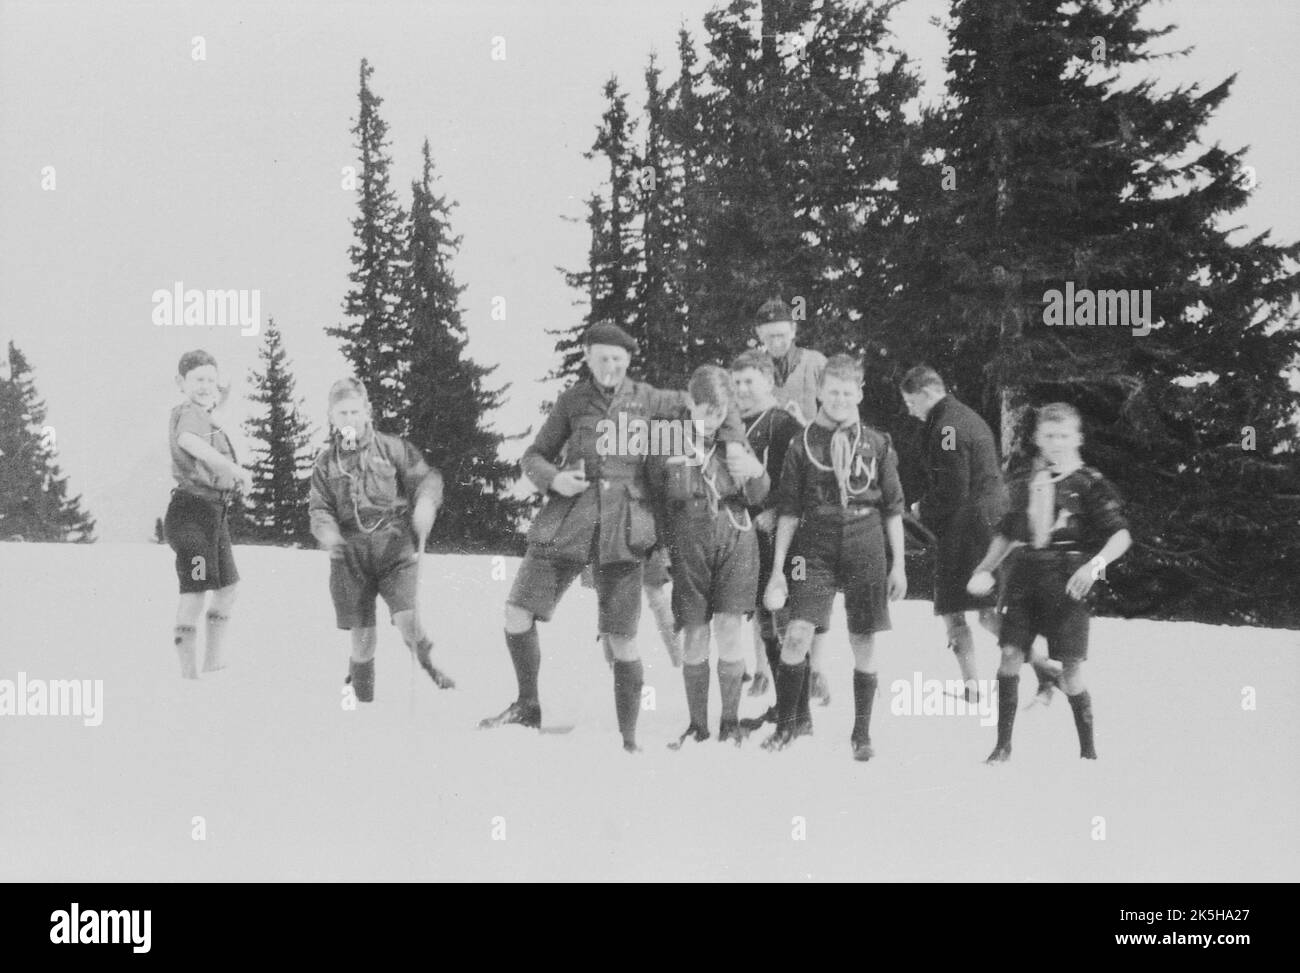 1930s. Members of the 28th Company, Beckenham Boy Scouts enjoying the snow. Some of the boys are clutching or throwing snowballs. Stock Photo